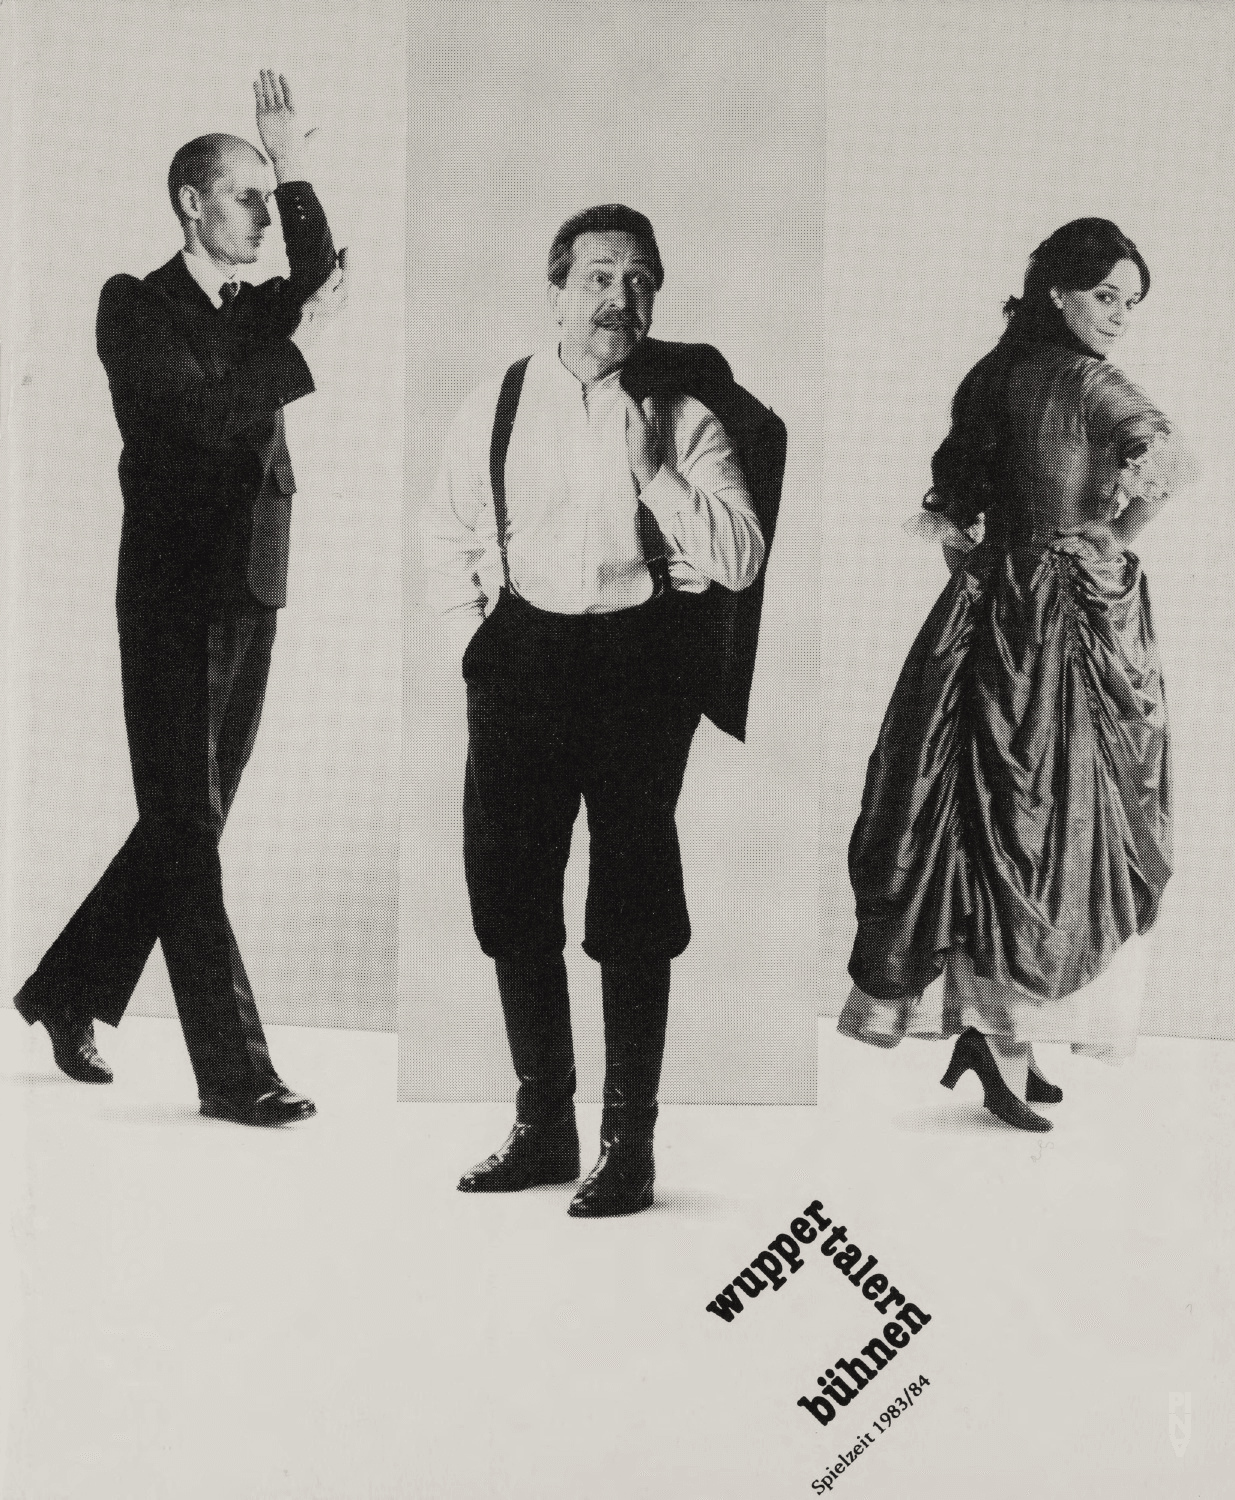 Season programme for “The Seven Deadly Sins” and “Auf dem Gebirge hat man ein Geschrei gehört (On the Mountain a Cry Was Heard)” by Pina Bausch with Tanztheater Wuppertal in in Wuppertal, 12/16/1983 – 05/13/1984